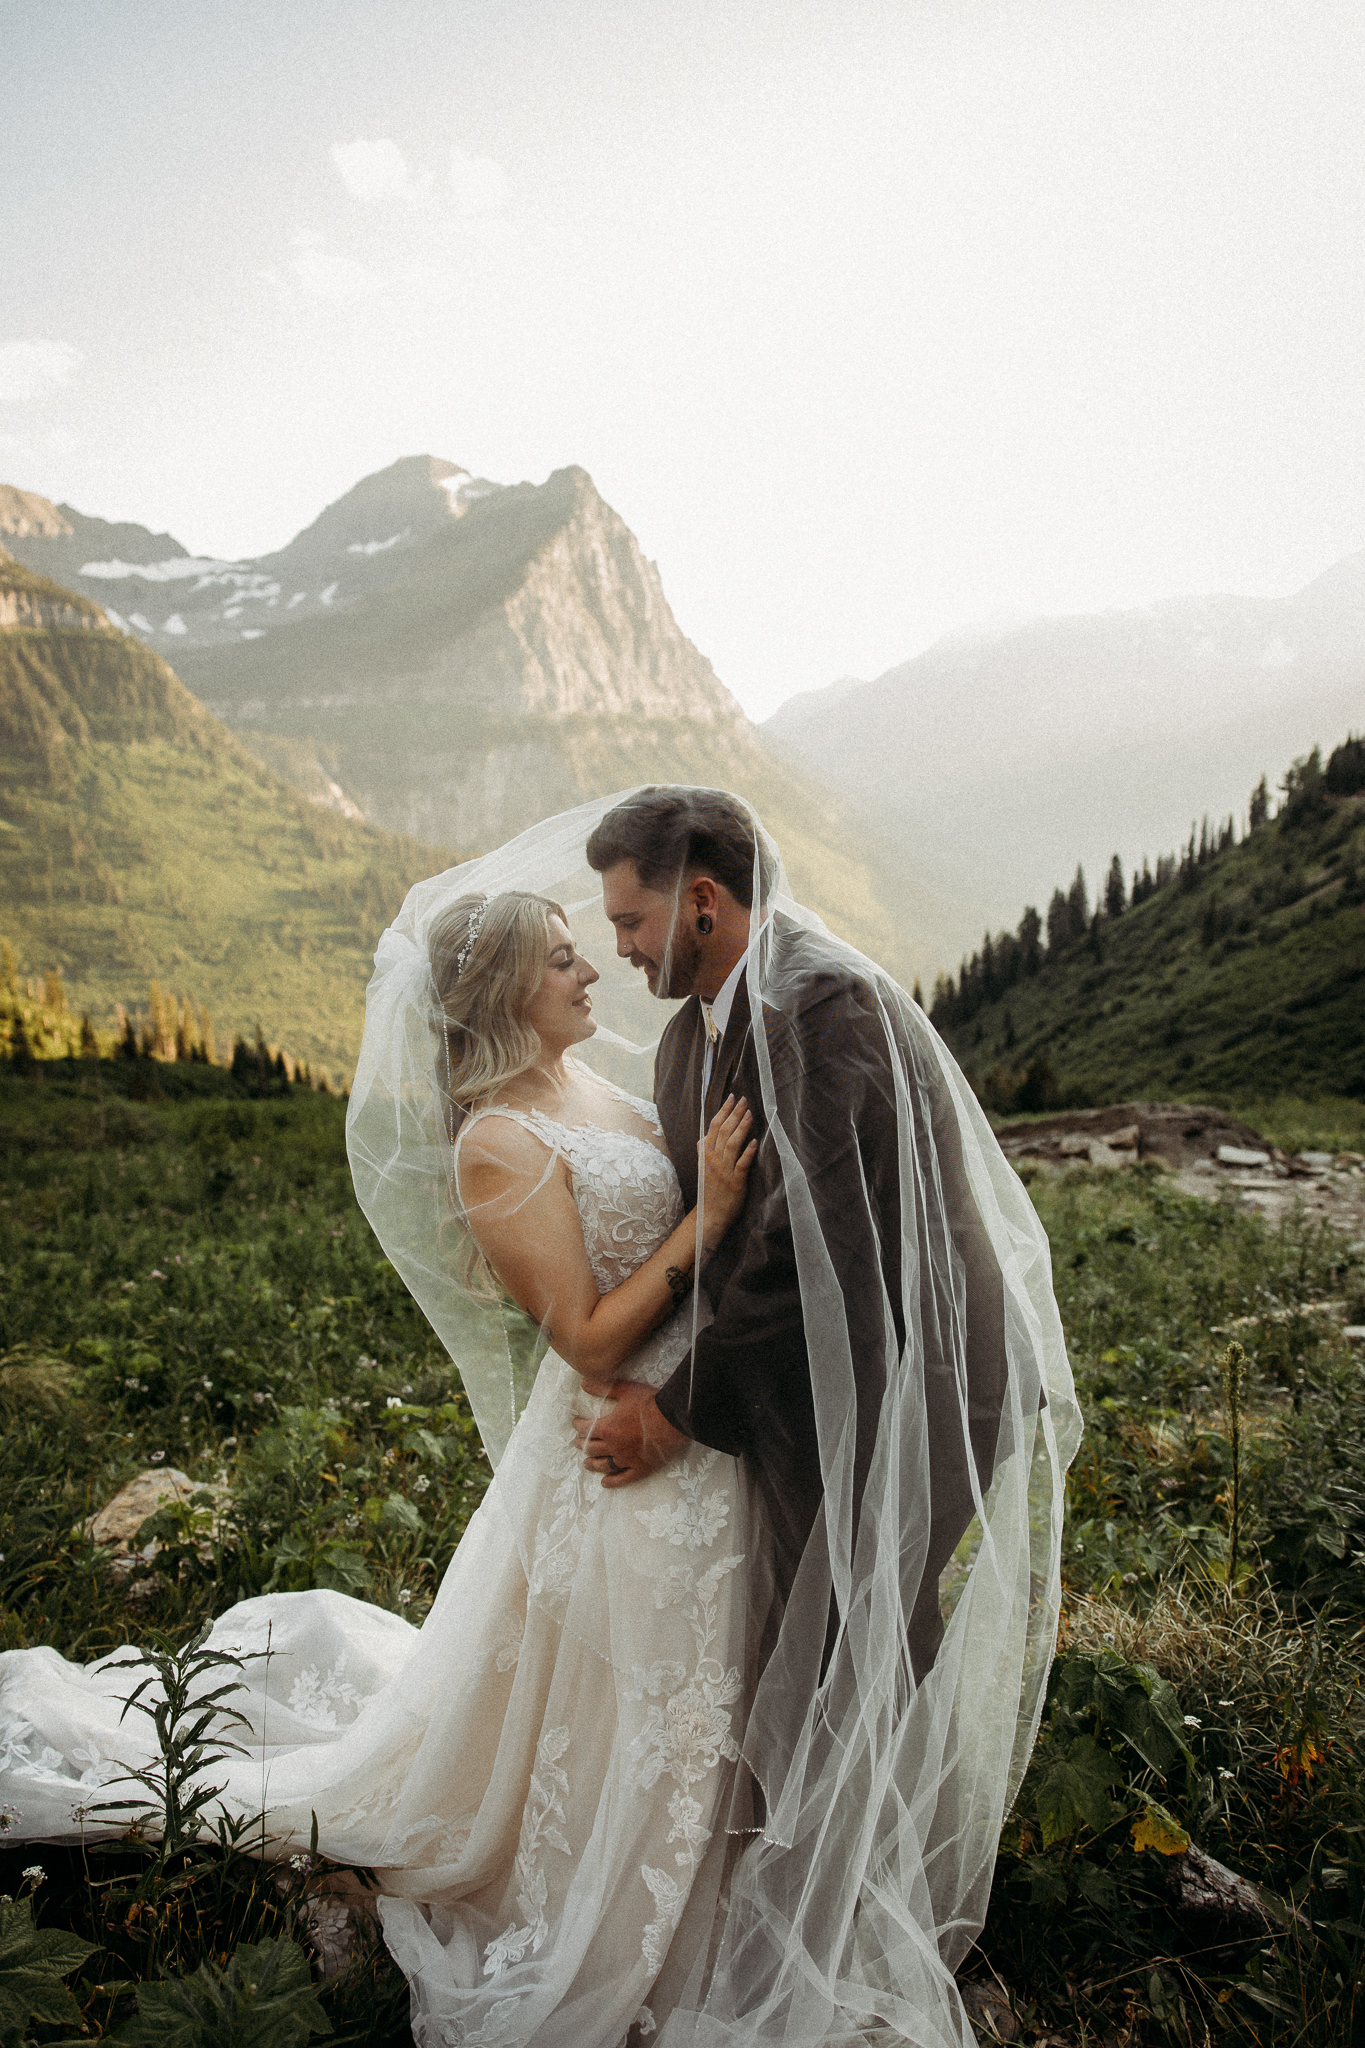 A bride in a white gown and veil holding flowers stands next to a groom in a black suit on a rocky ledge with mountains and valley in the background at their destination elopement